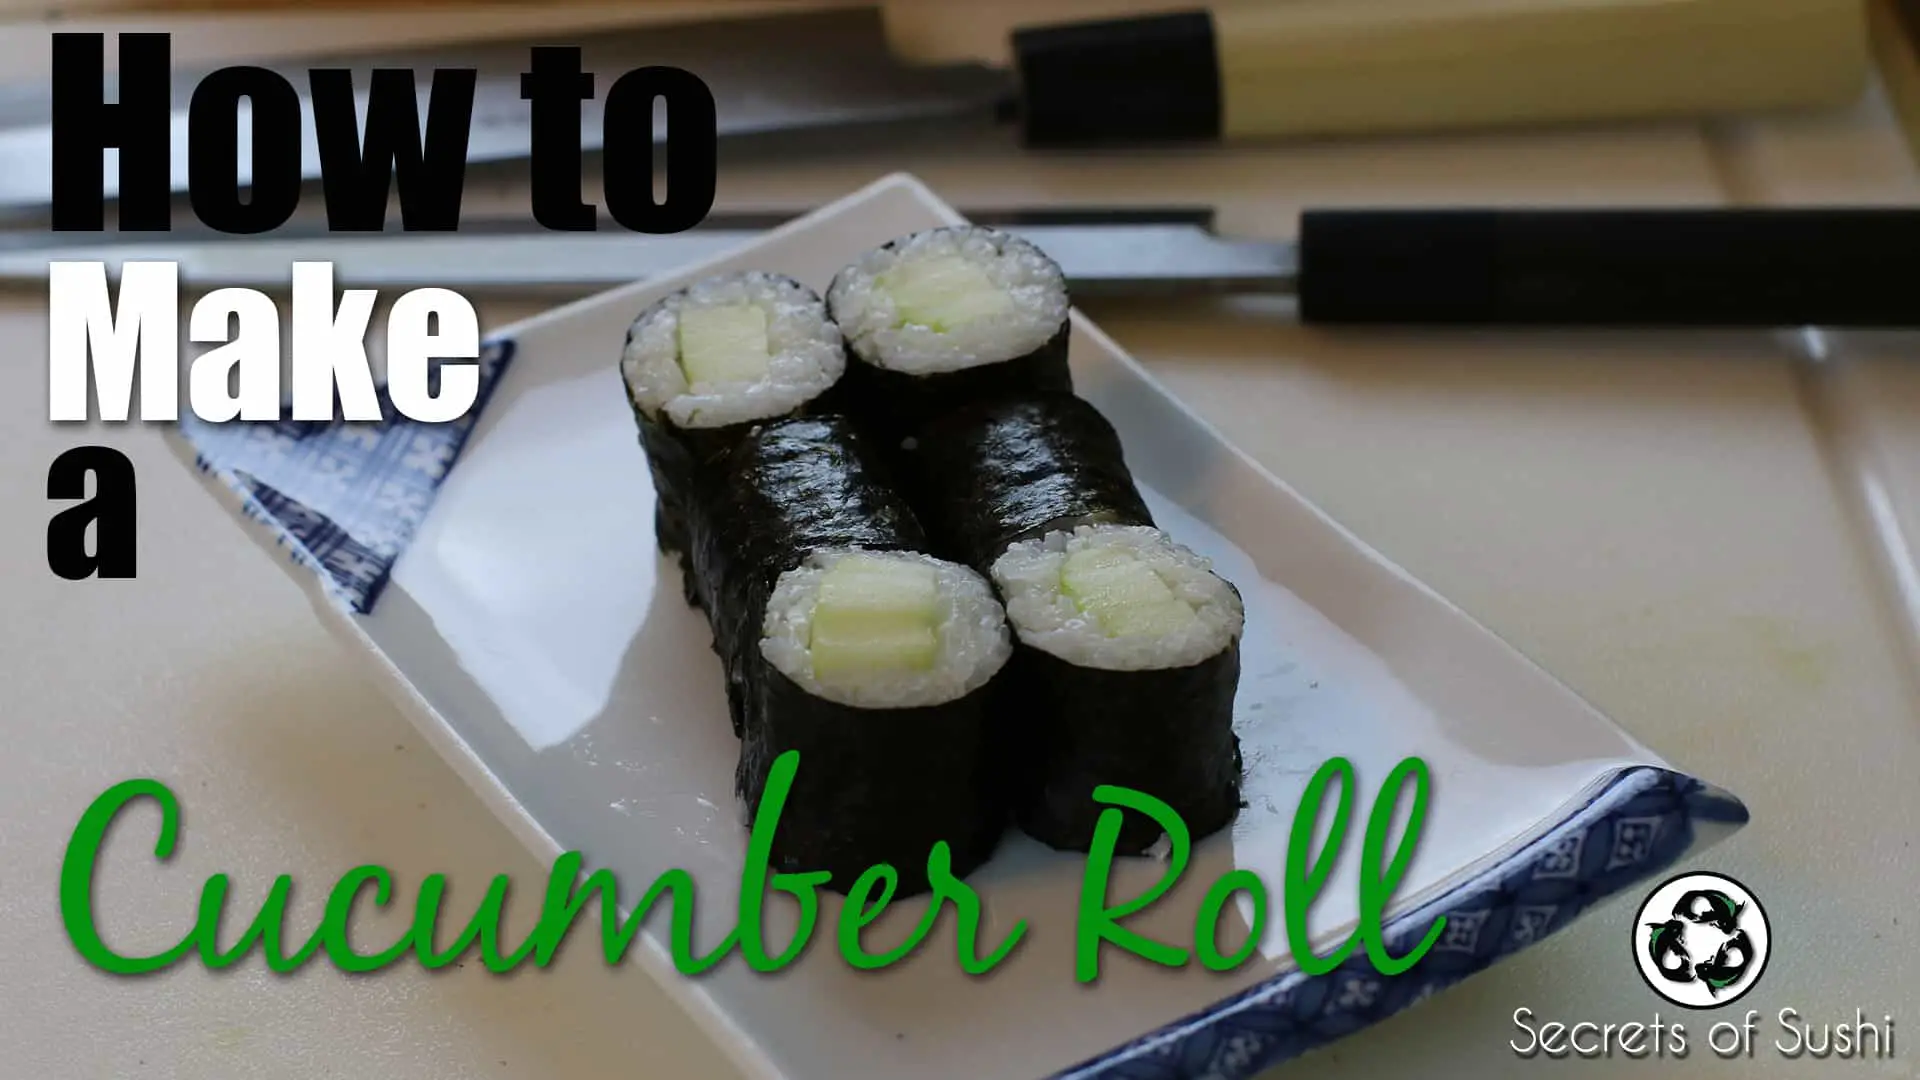 How to Make a Cucumber Roll